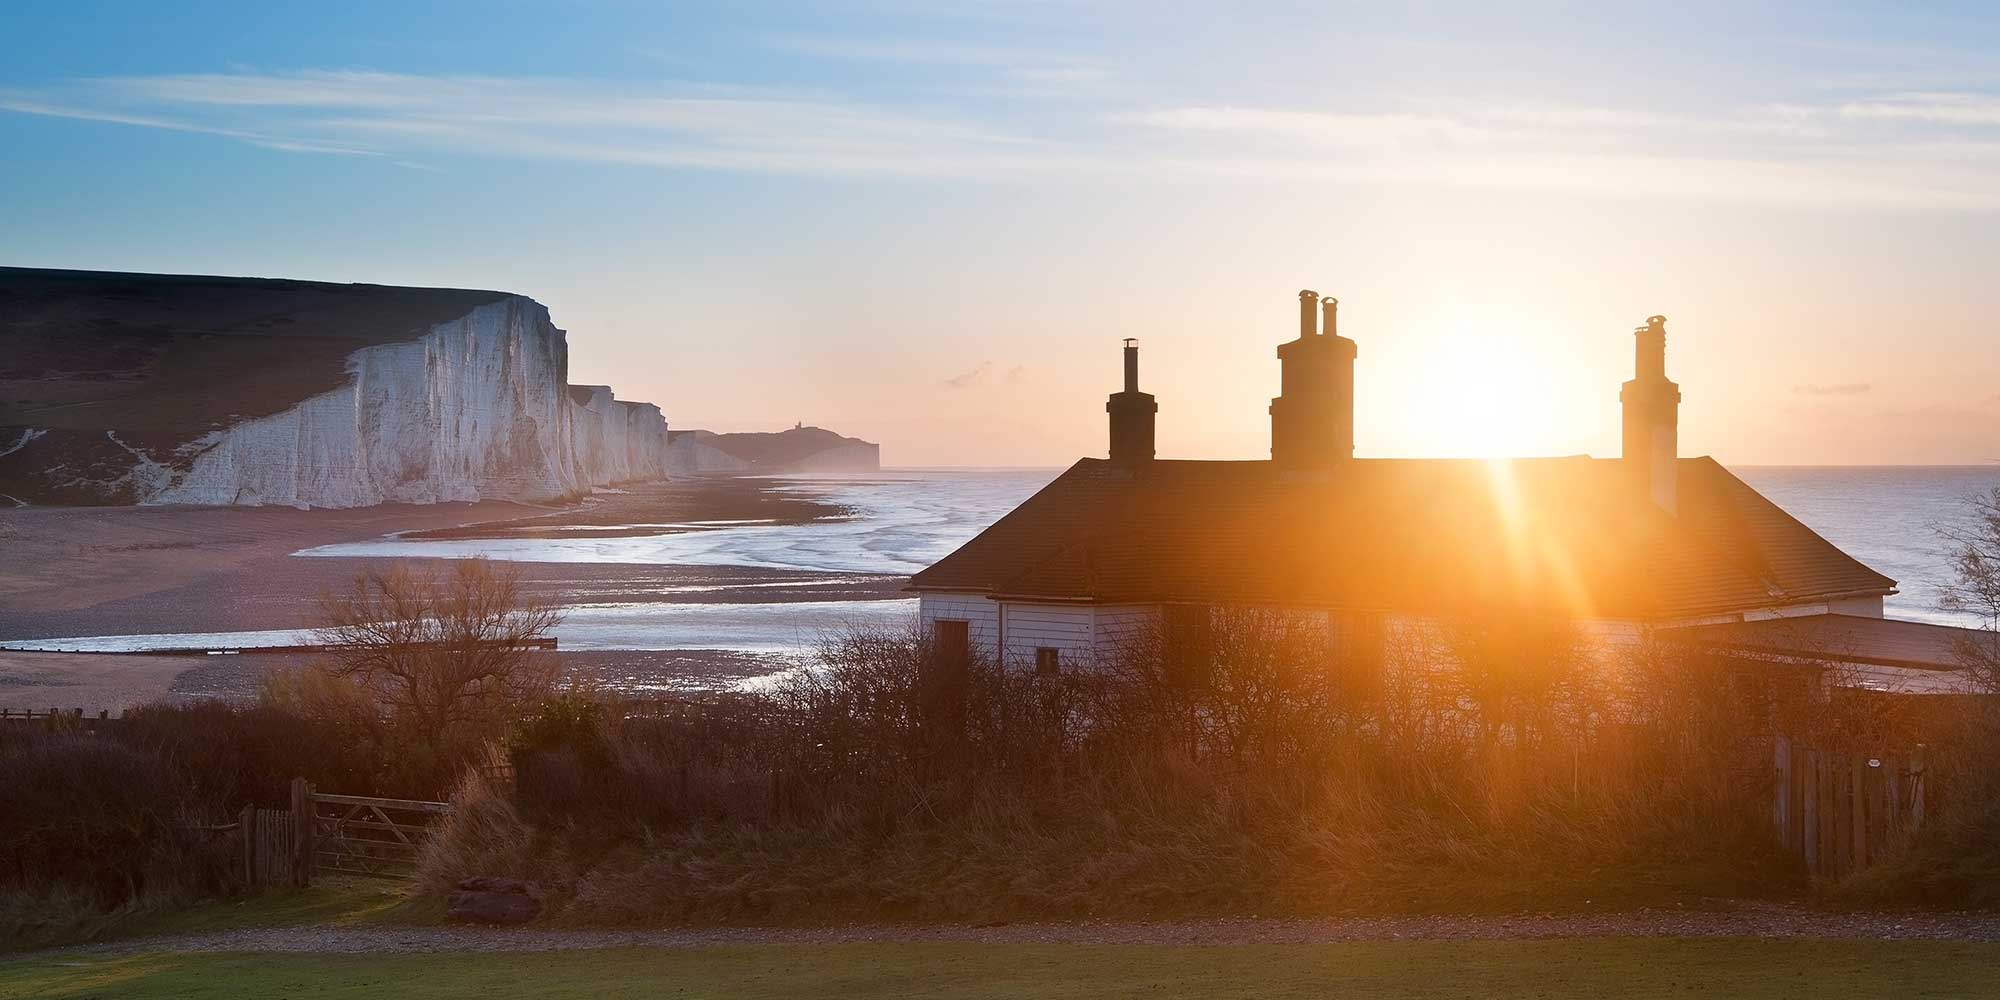 Sheer chalk cliffs with the sun setting over a nearby house